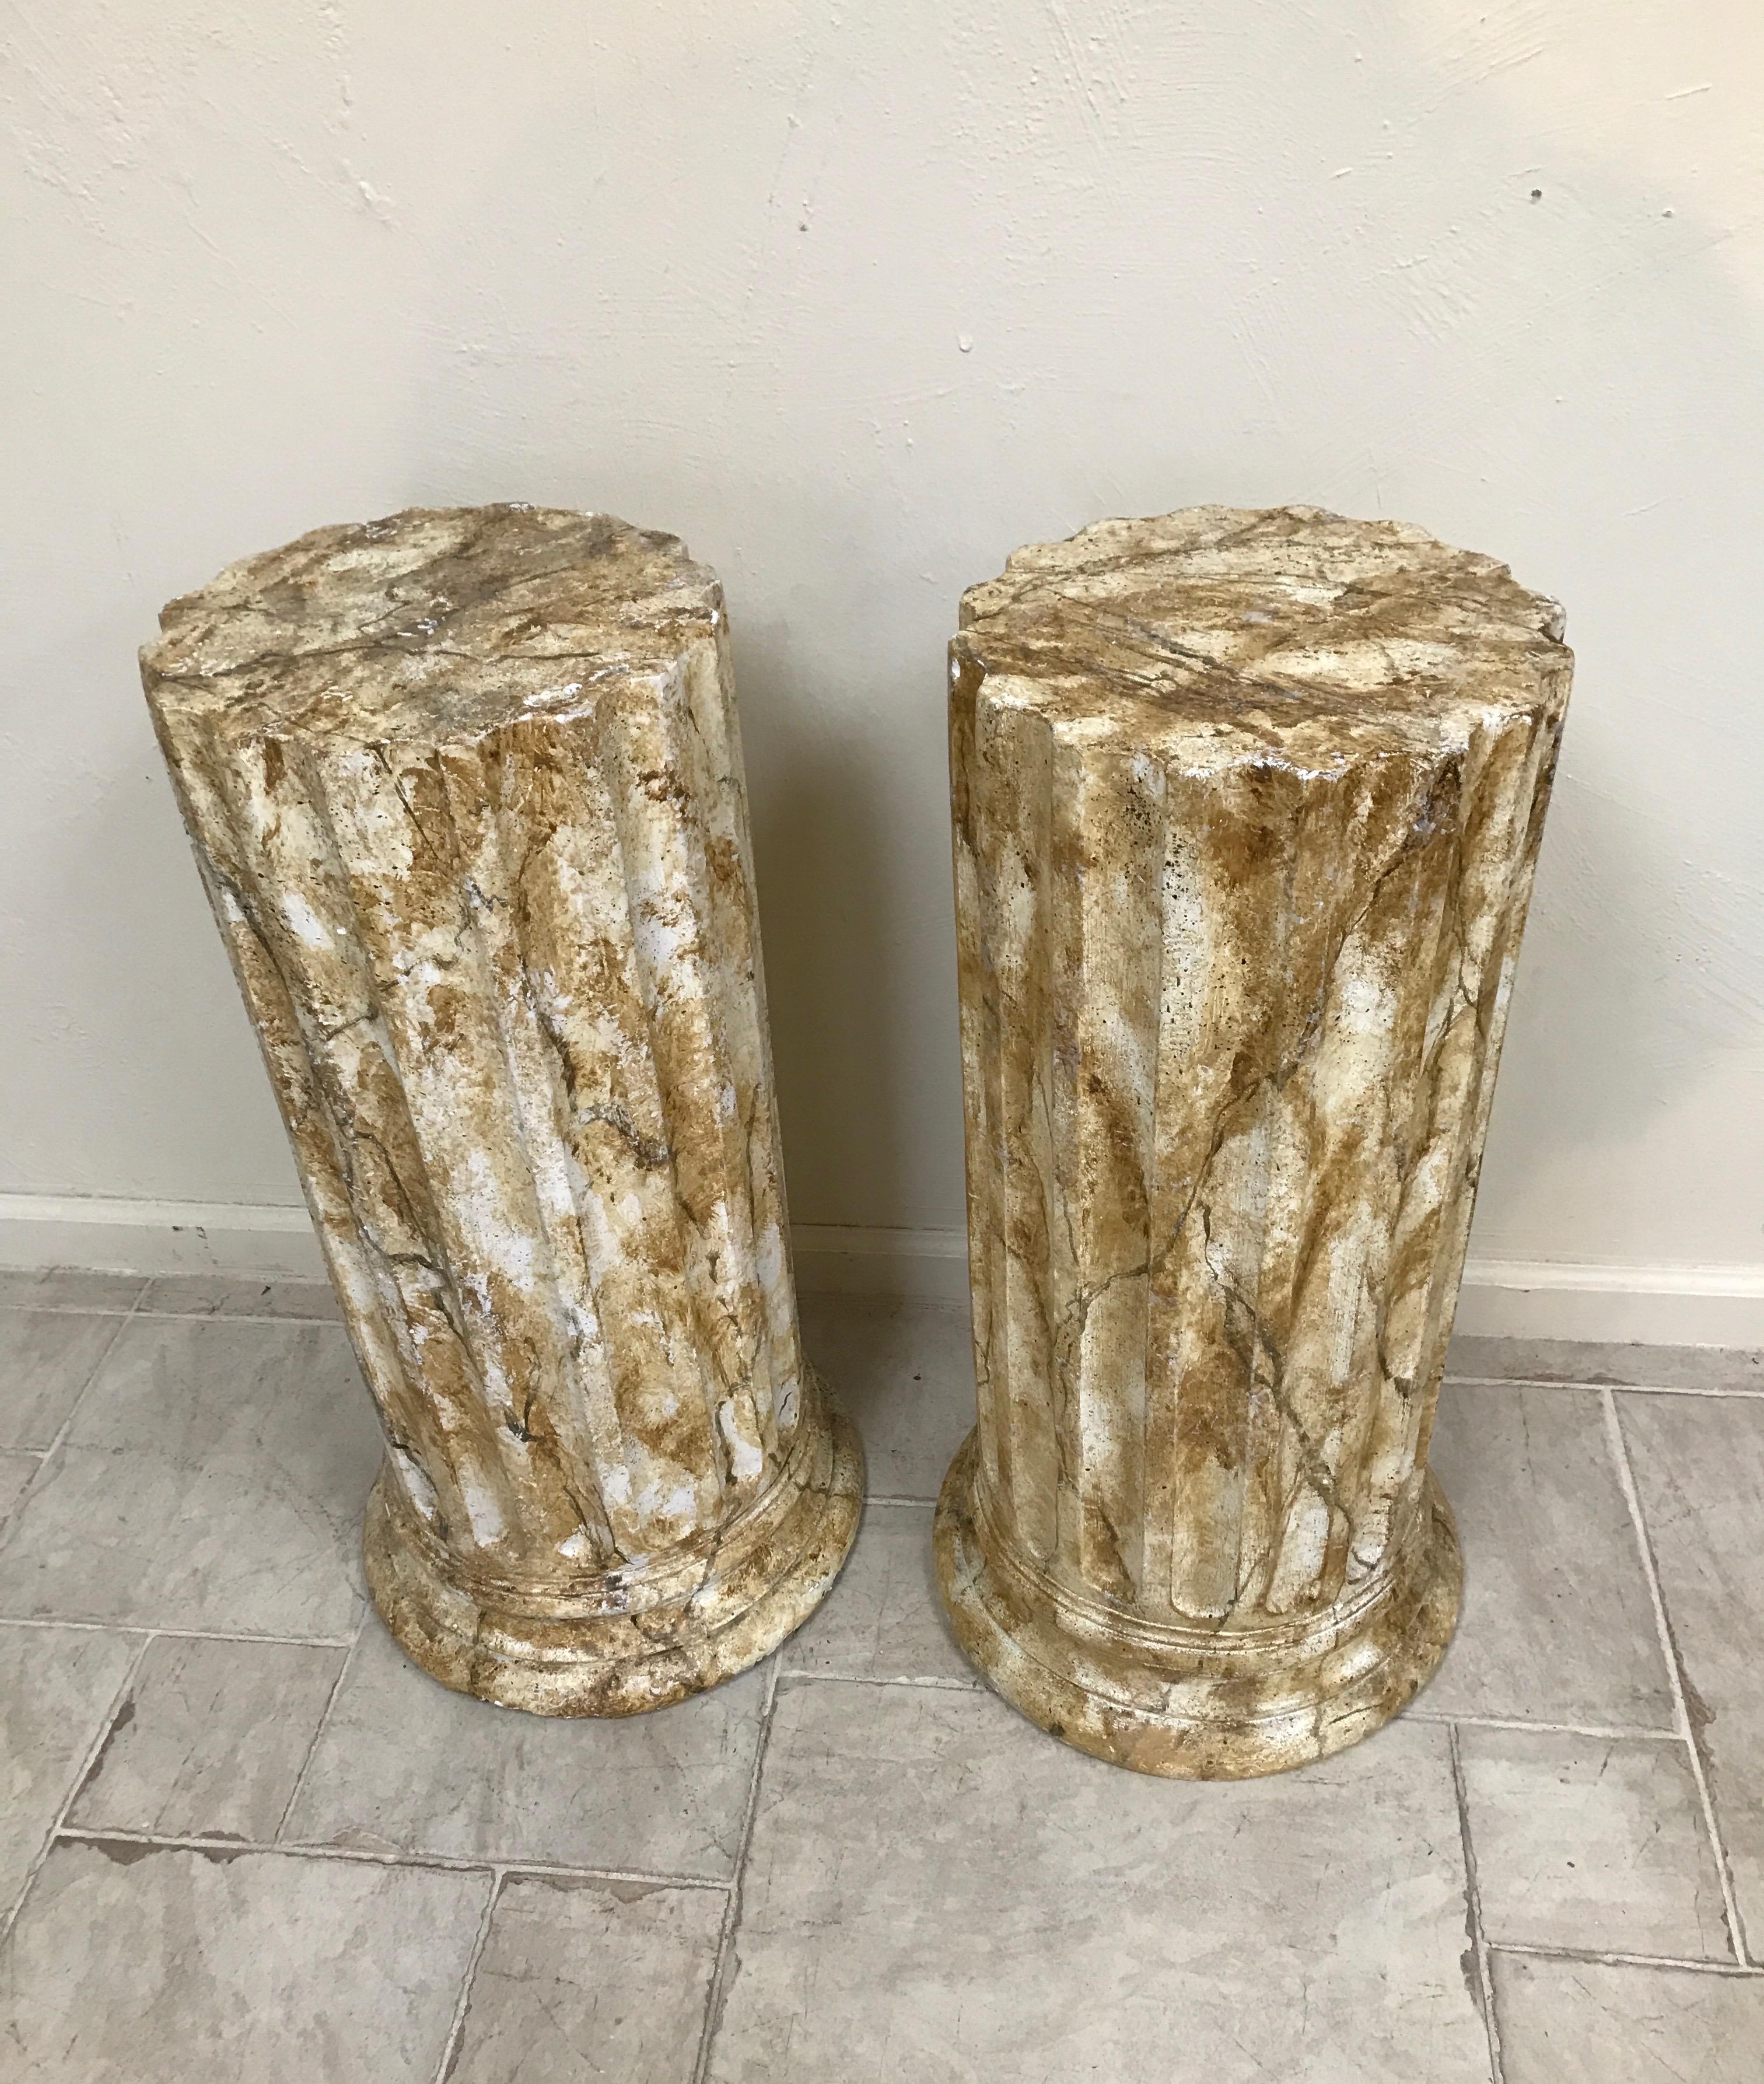 Pair of fluted plaster pedestals painted with a faux marble finish. Pedestals are 29